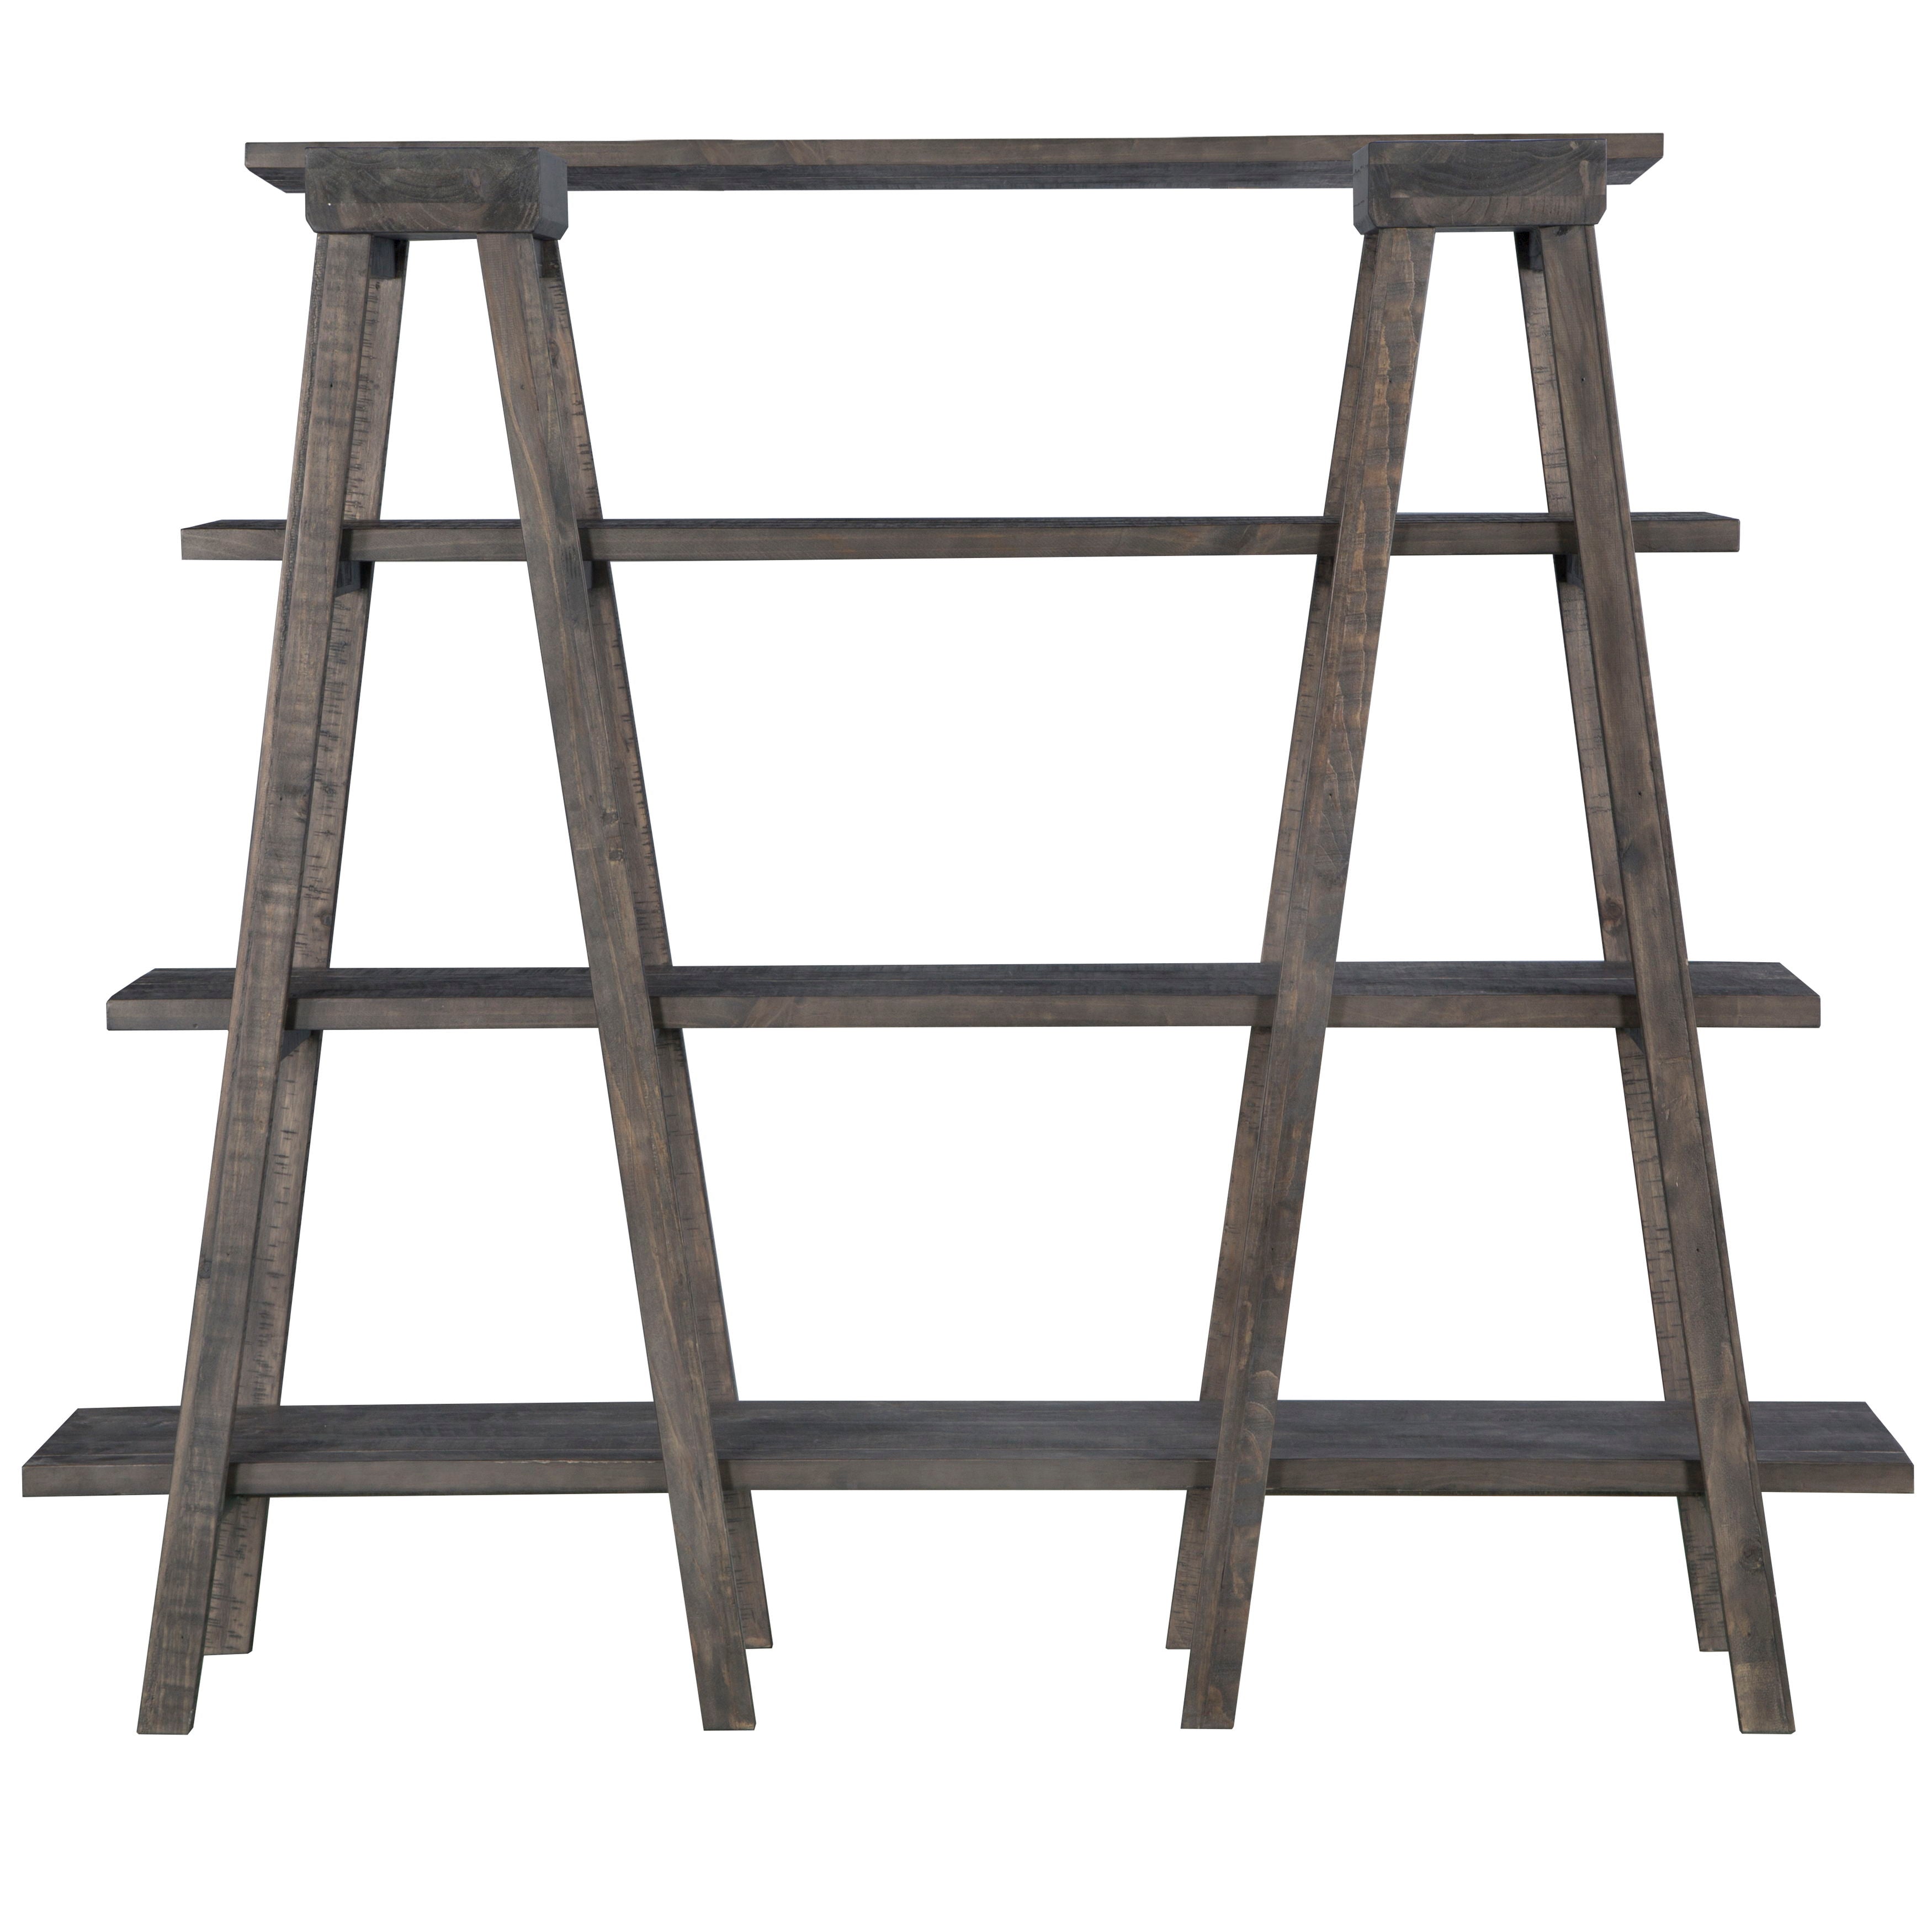 Sutton Place - Bookshelf - Weathered Charcoal